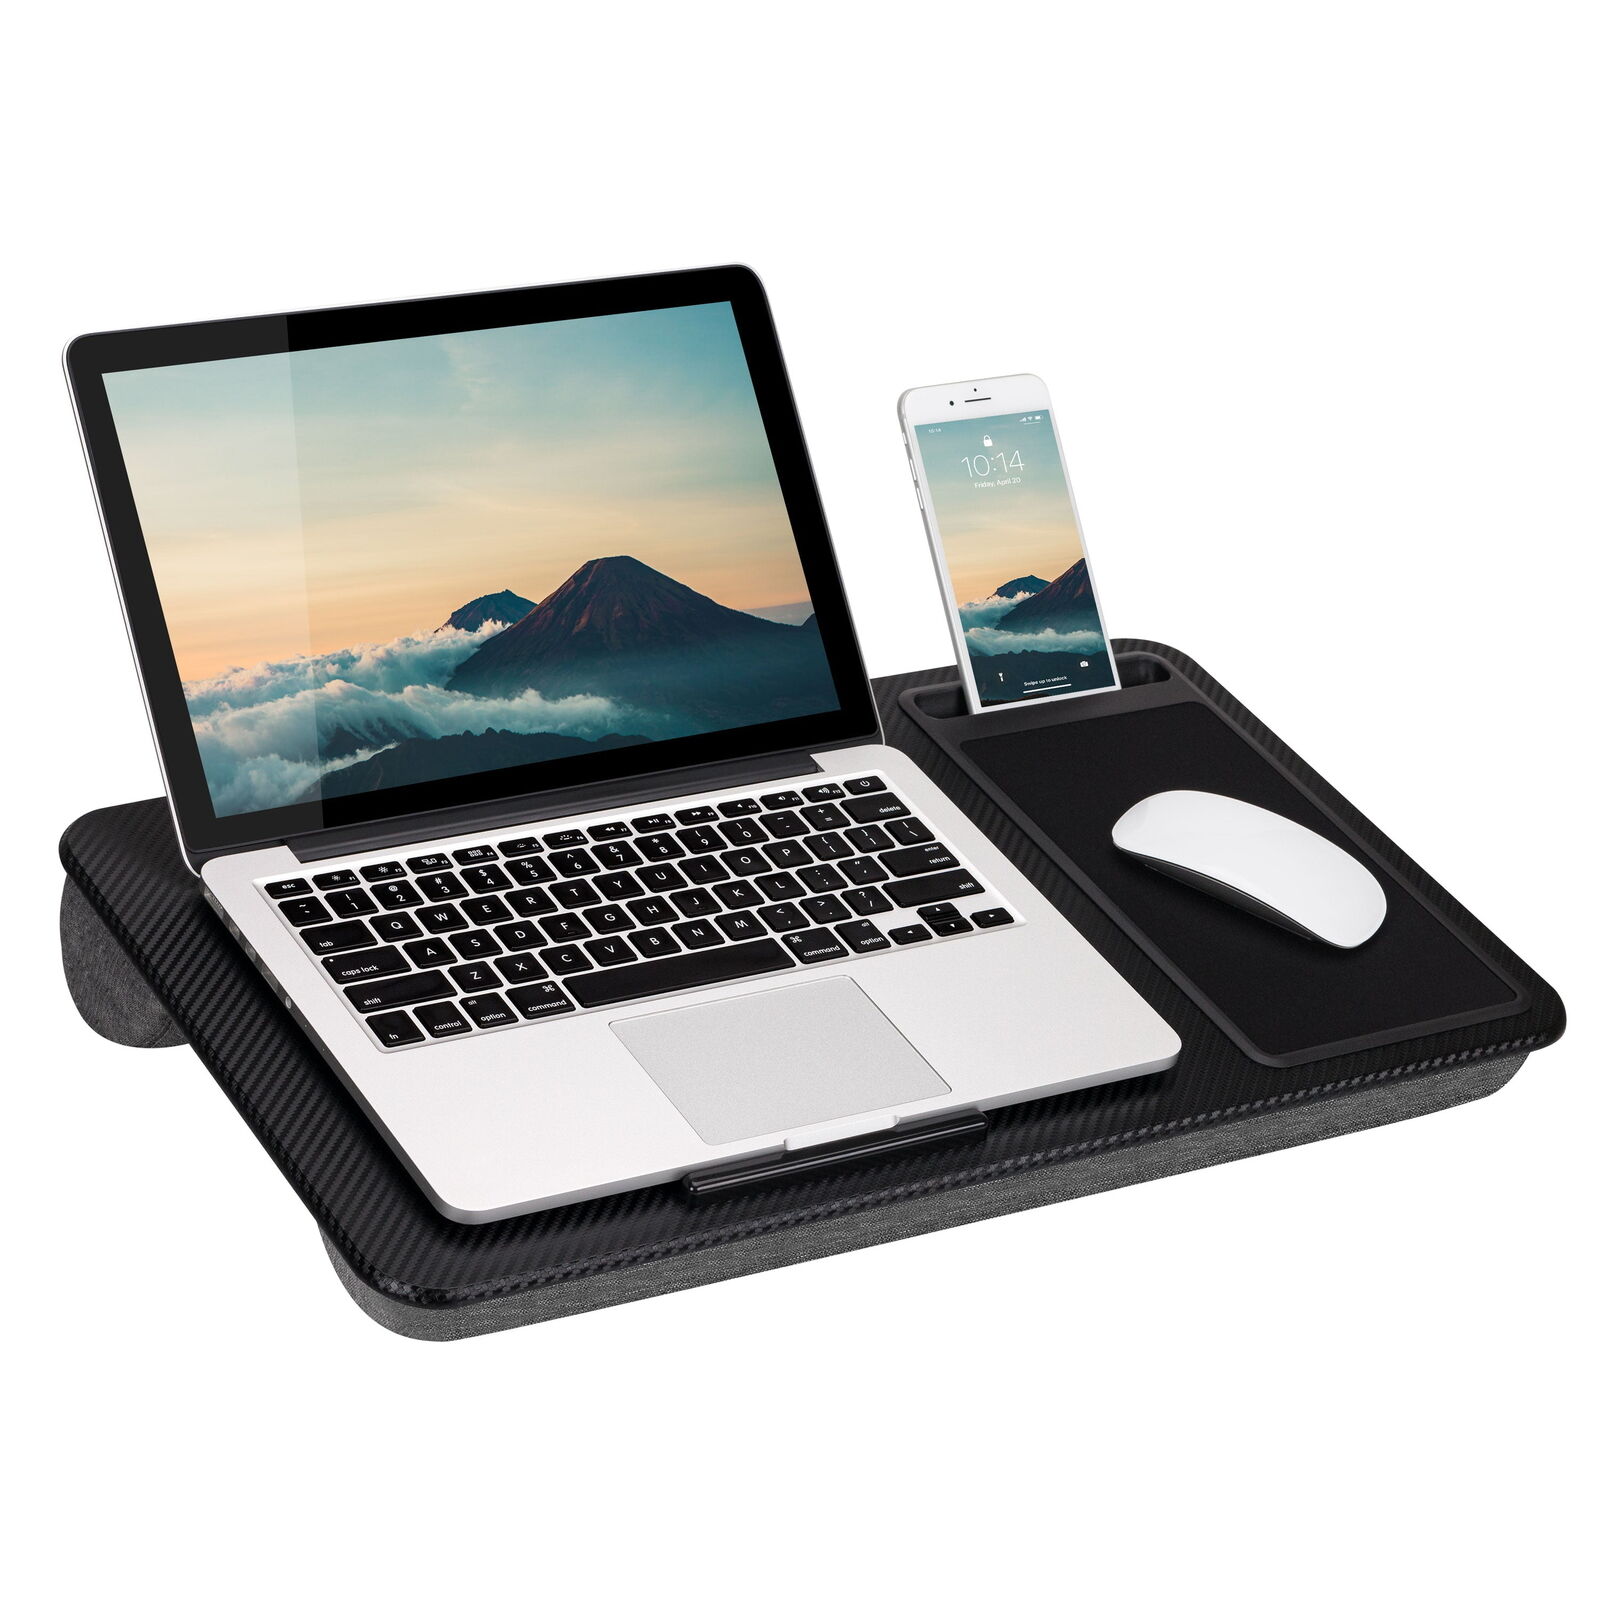 LapGear Home Office Lap Desk with Mouse Pad and Phone Holder, 21.1